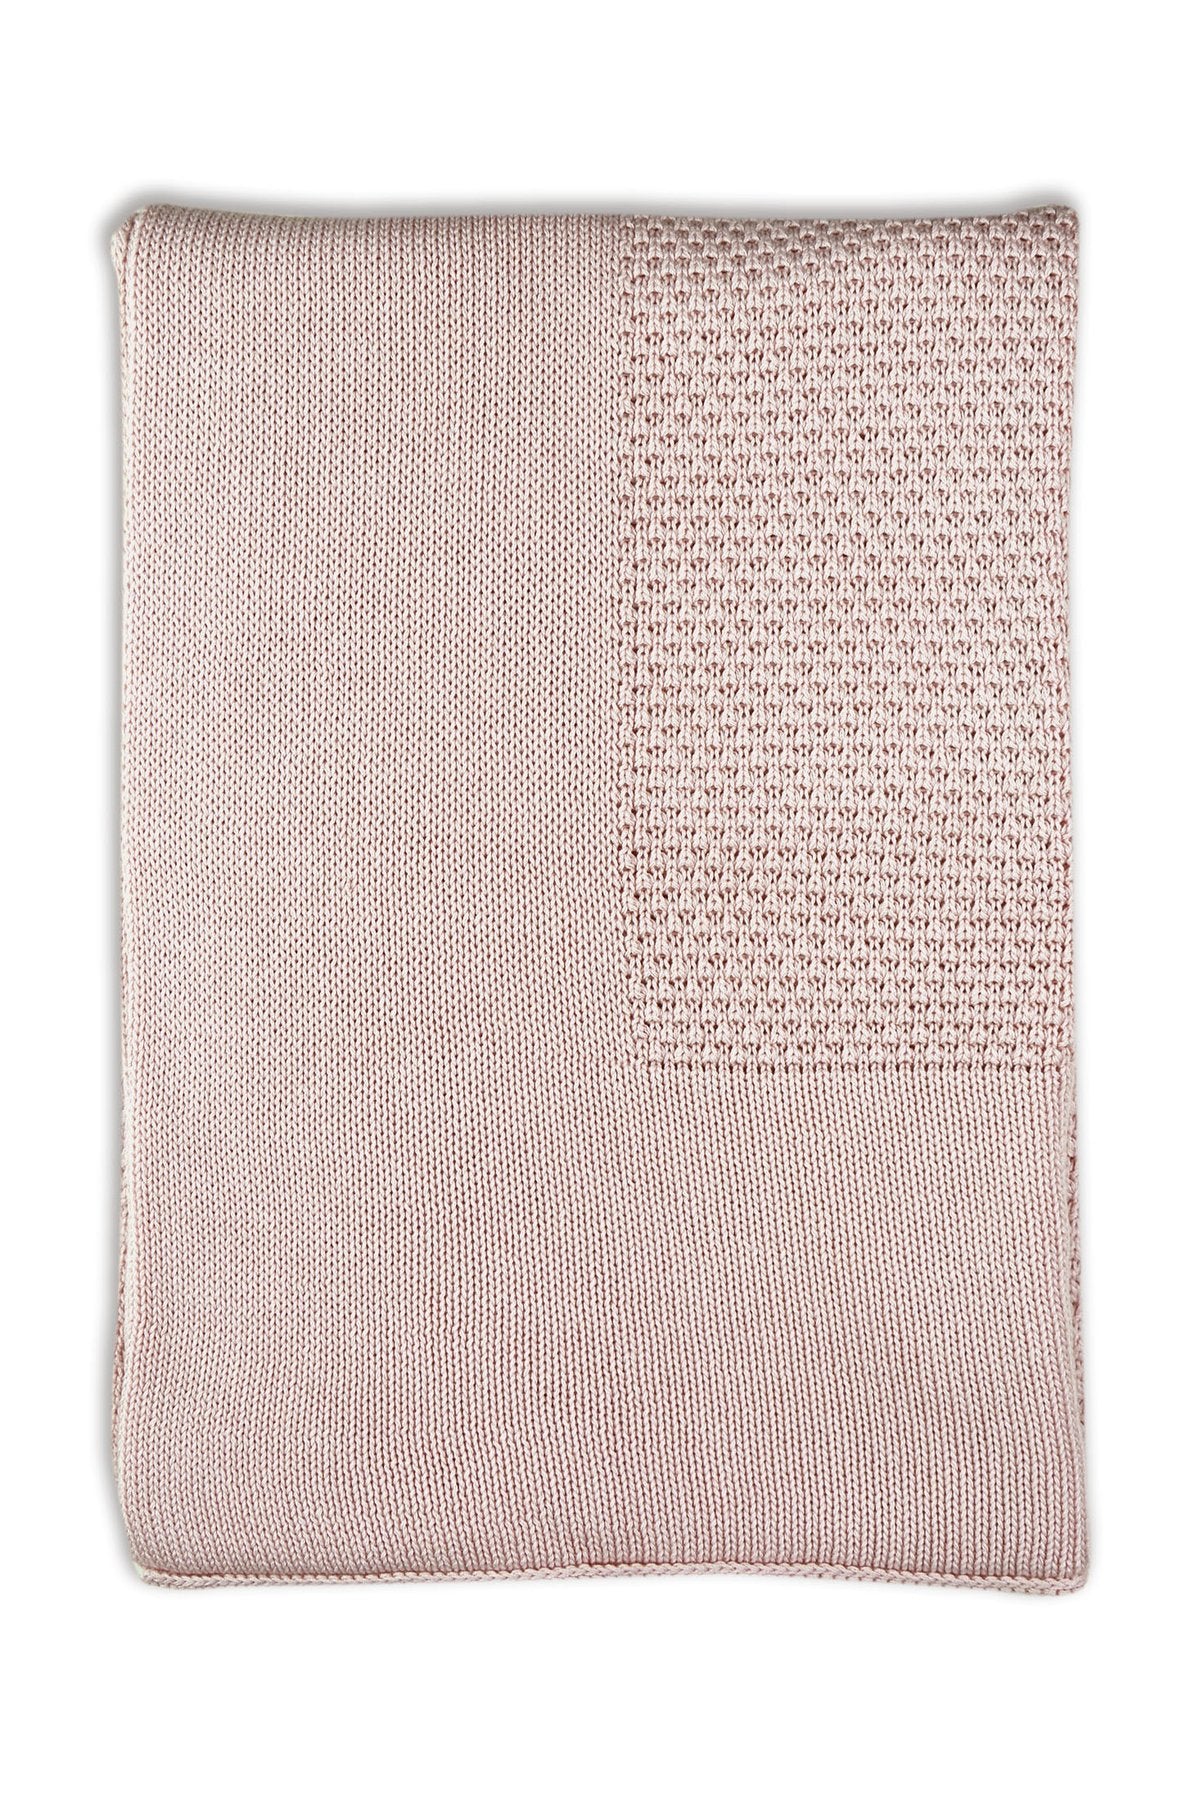 Little Bamboo Textured Knit Blanket - Dusty Pink